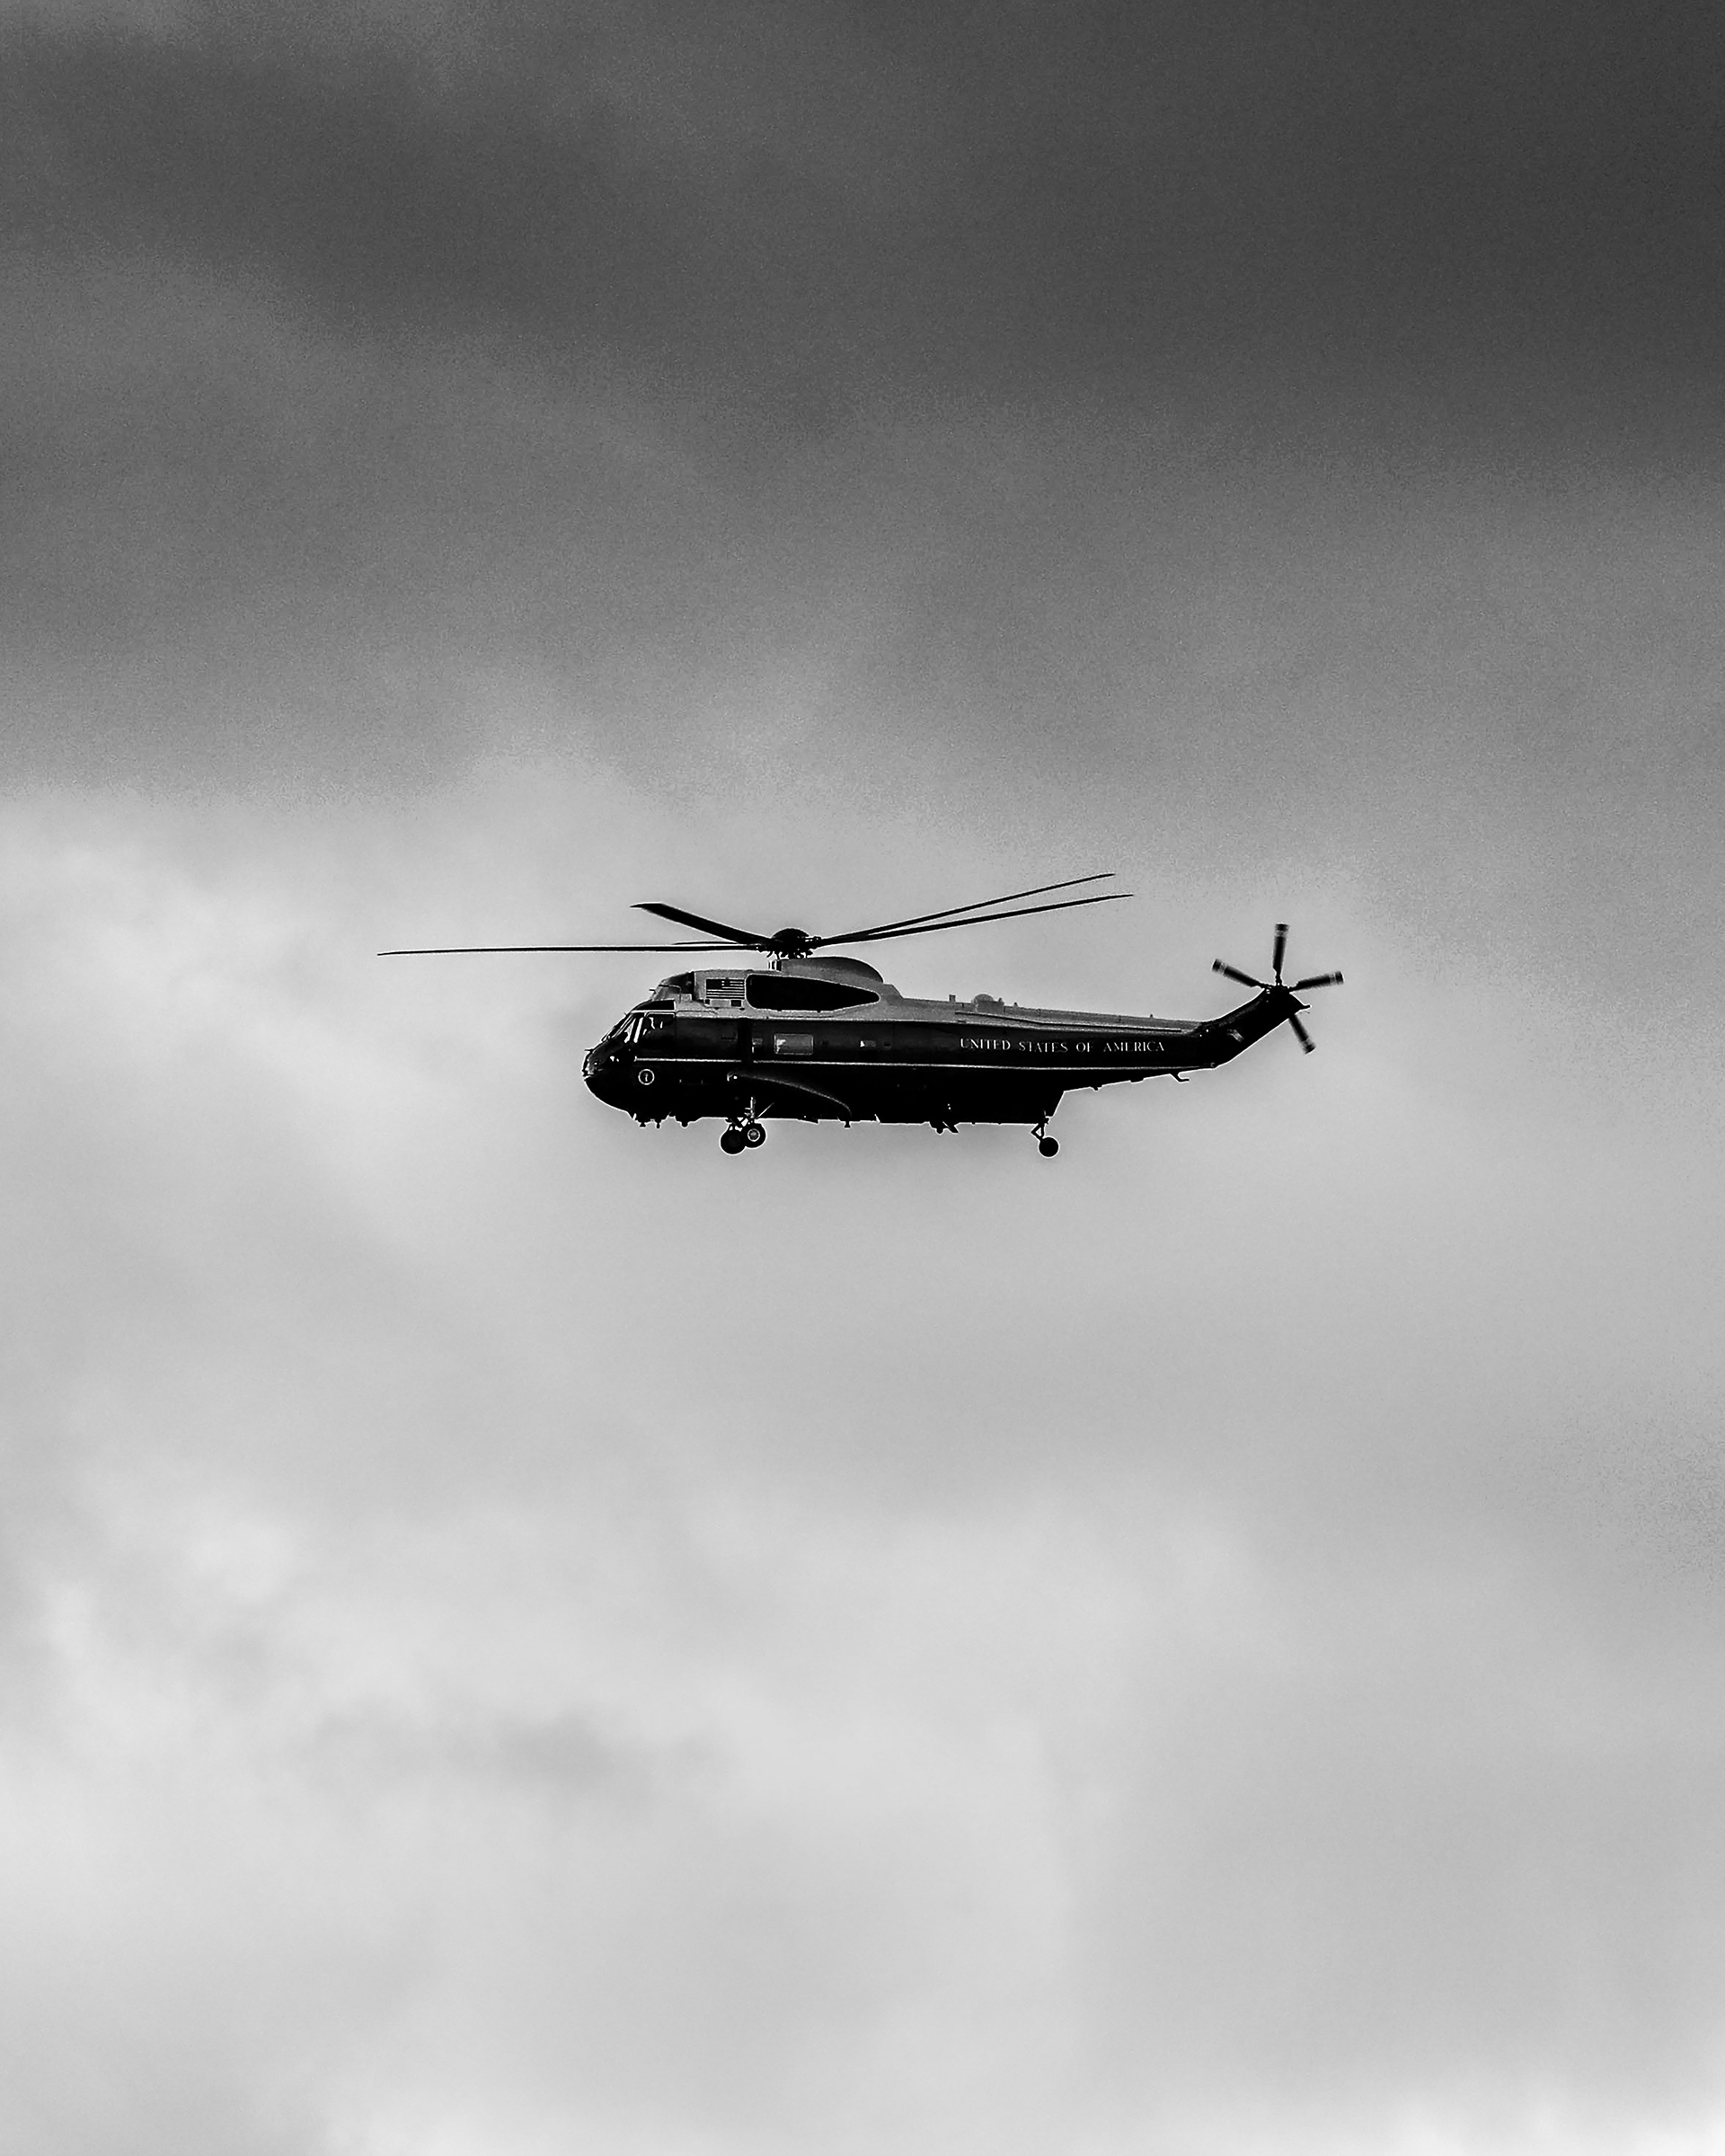 Marine One circles the National Mall carrying President Donald Trump as he departs the White House ahead of the inauguration.